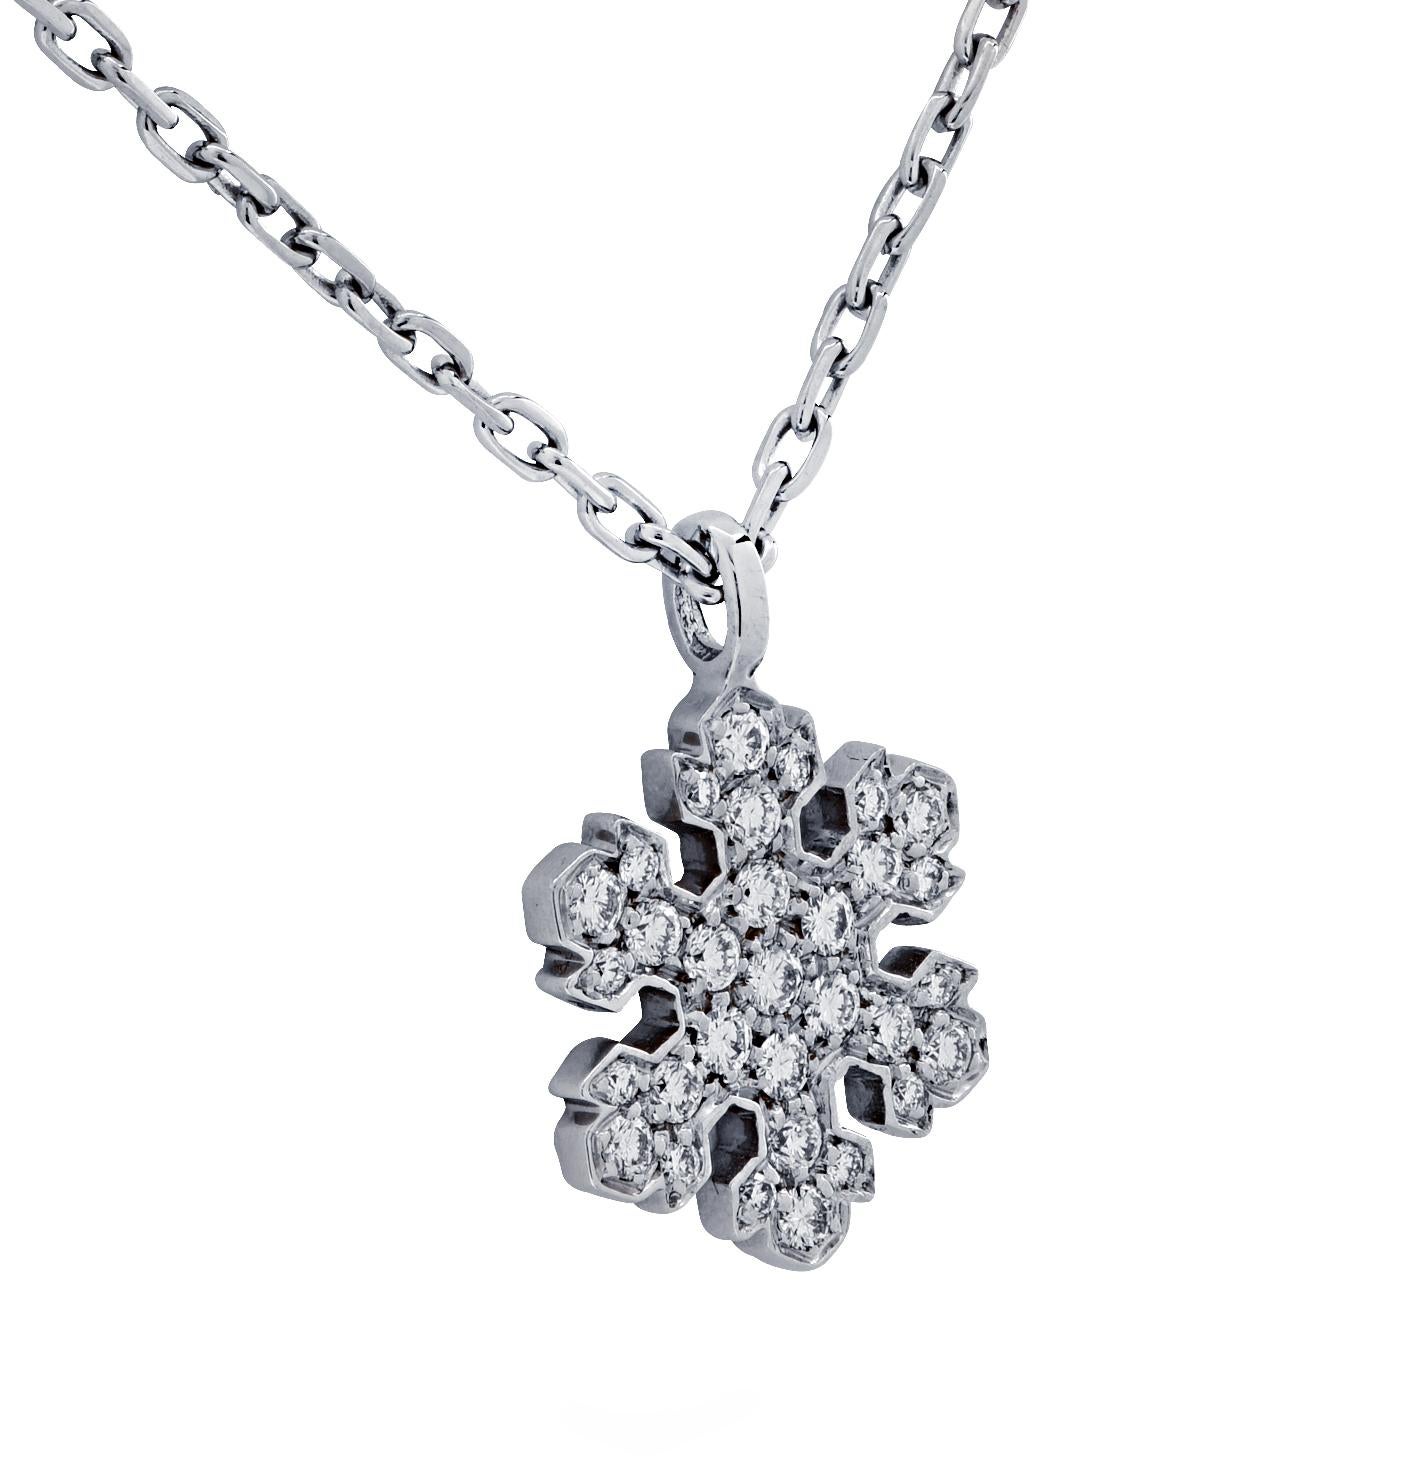 From the House of Bvlgari, this Fiocco di Neve snowflake diamond necklace is crafted in 18 karat white gold, and features 31 round brilliant cut diamonds weighing approximately .69 carats total F color VS clarity. The pendant measures 14.6 mm in